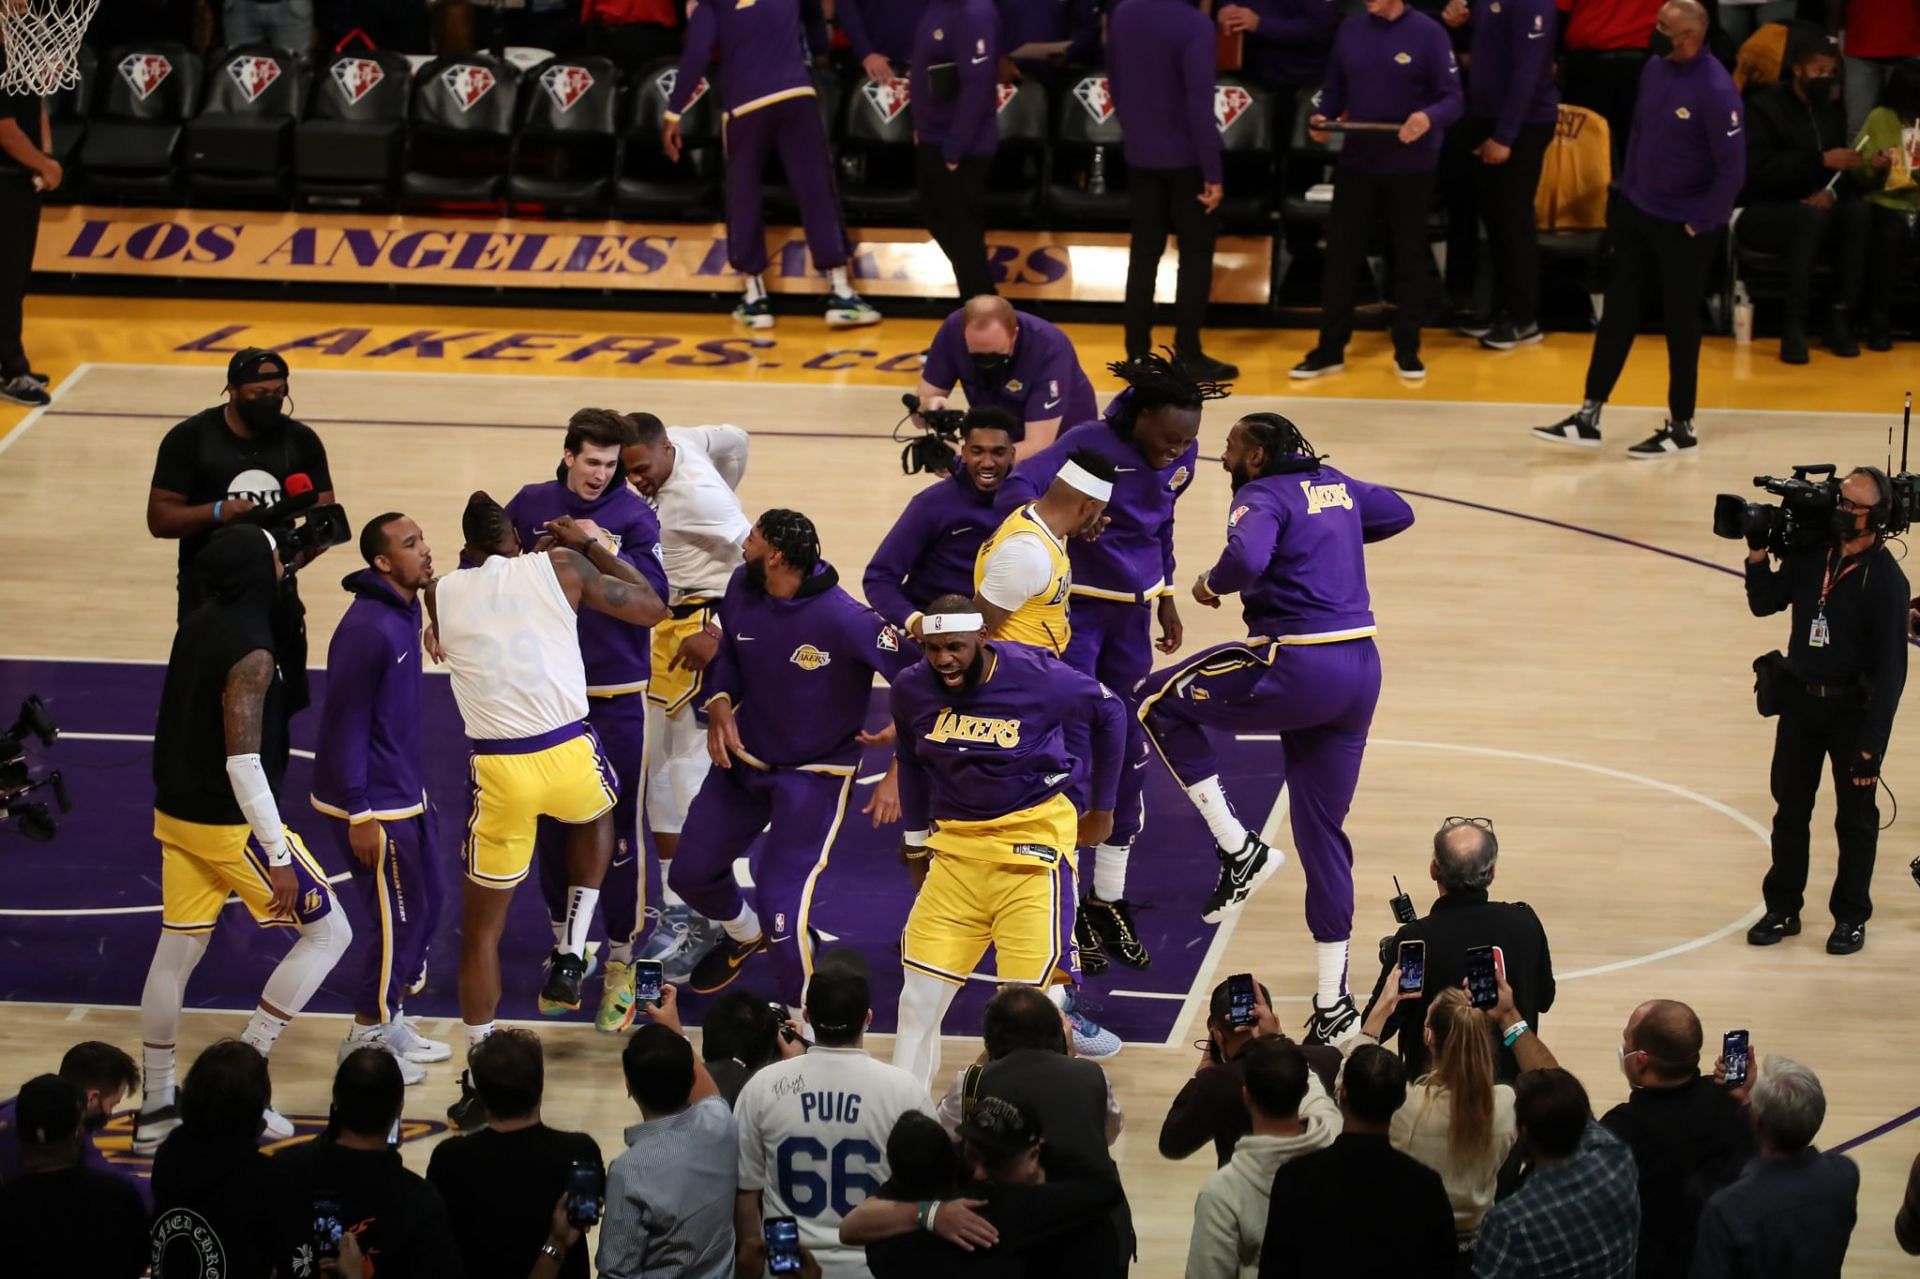 The LA Lakers have to improve on both ends of the floor to turn their season around. [Photo: The Spun]